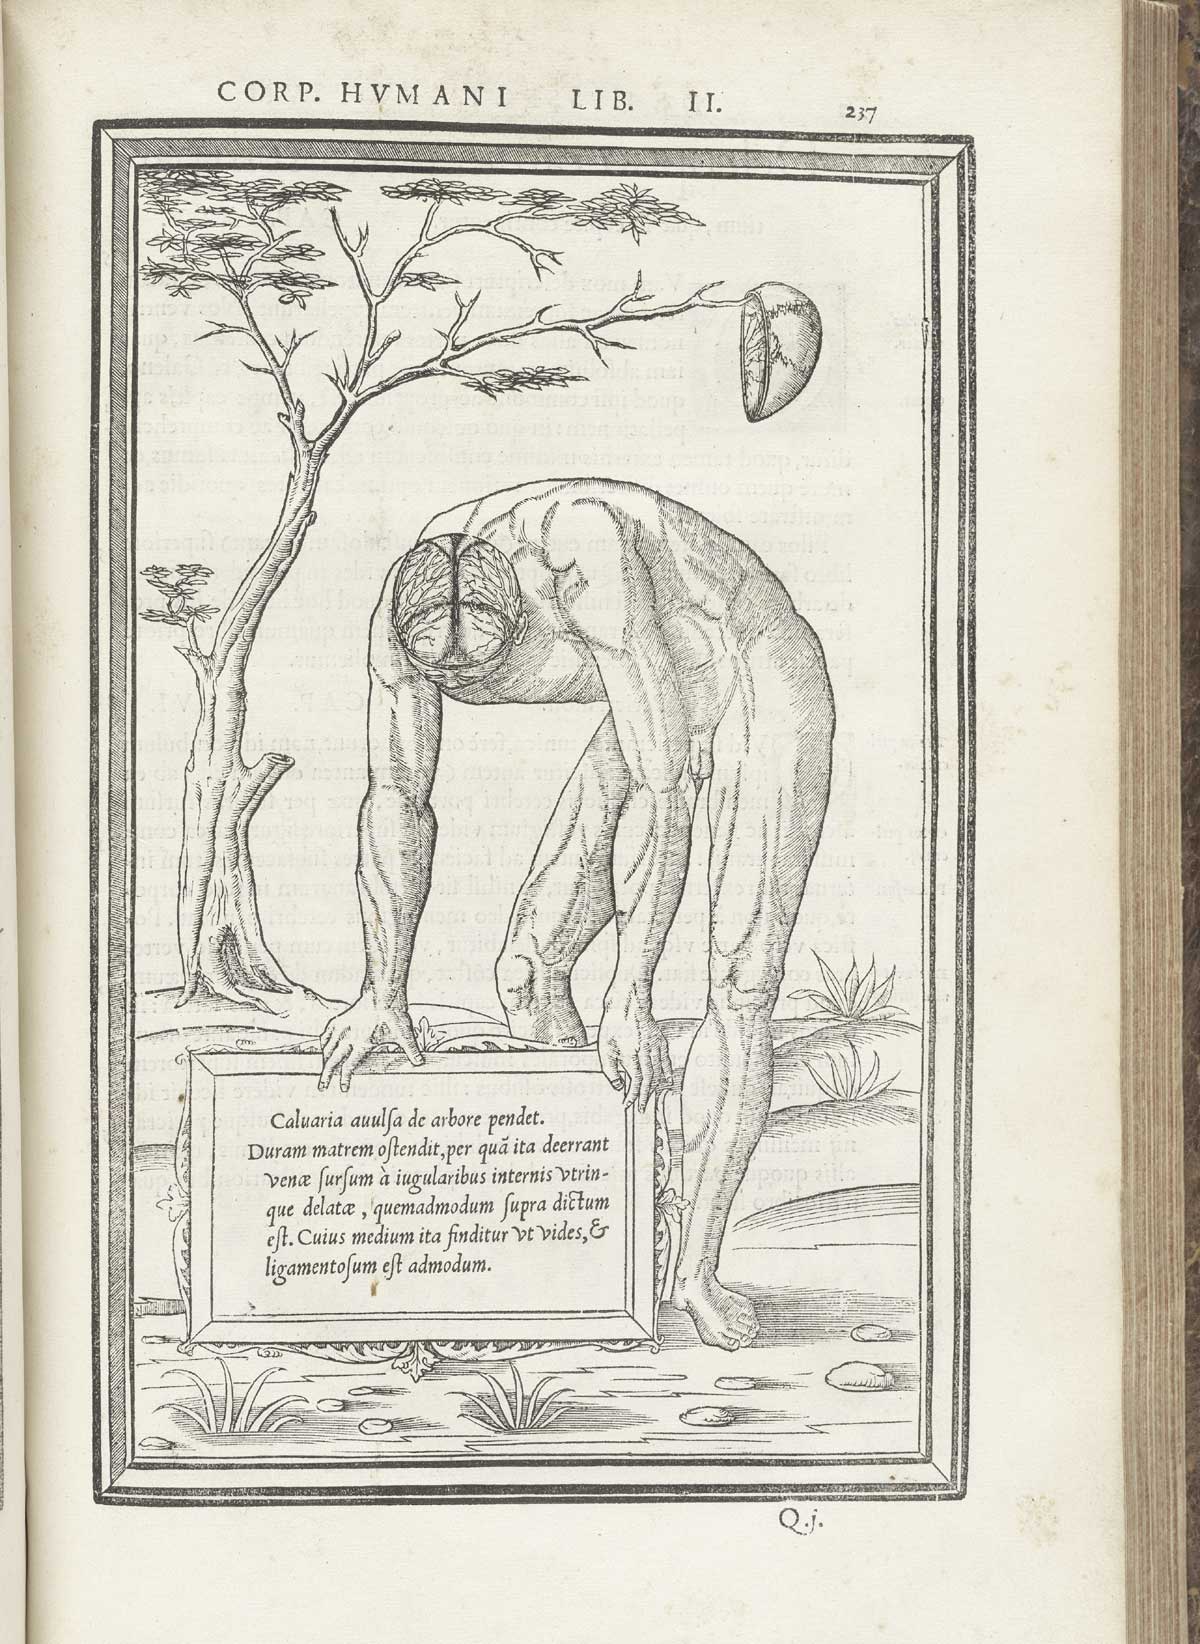 Woodcut of nude male figure in a pastoral setting standing and bowing forward facing downward and to the left, giving a view of the top of his head with the top of the skull removed to show the dura and arachnoid maters, while in the background to the right hangs the top of his skull from the branch of a naked tree; below him is a tablet naming the structures in Latin; from Charles Estienne’s De dissection partium corporis humani libri tres, NLM Call no.: WZ 240 E81dd 1545.